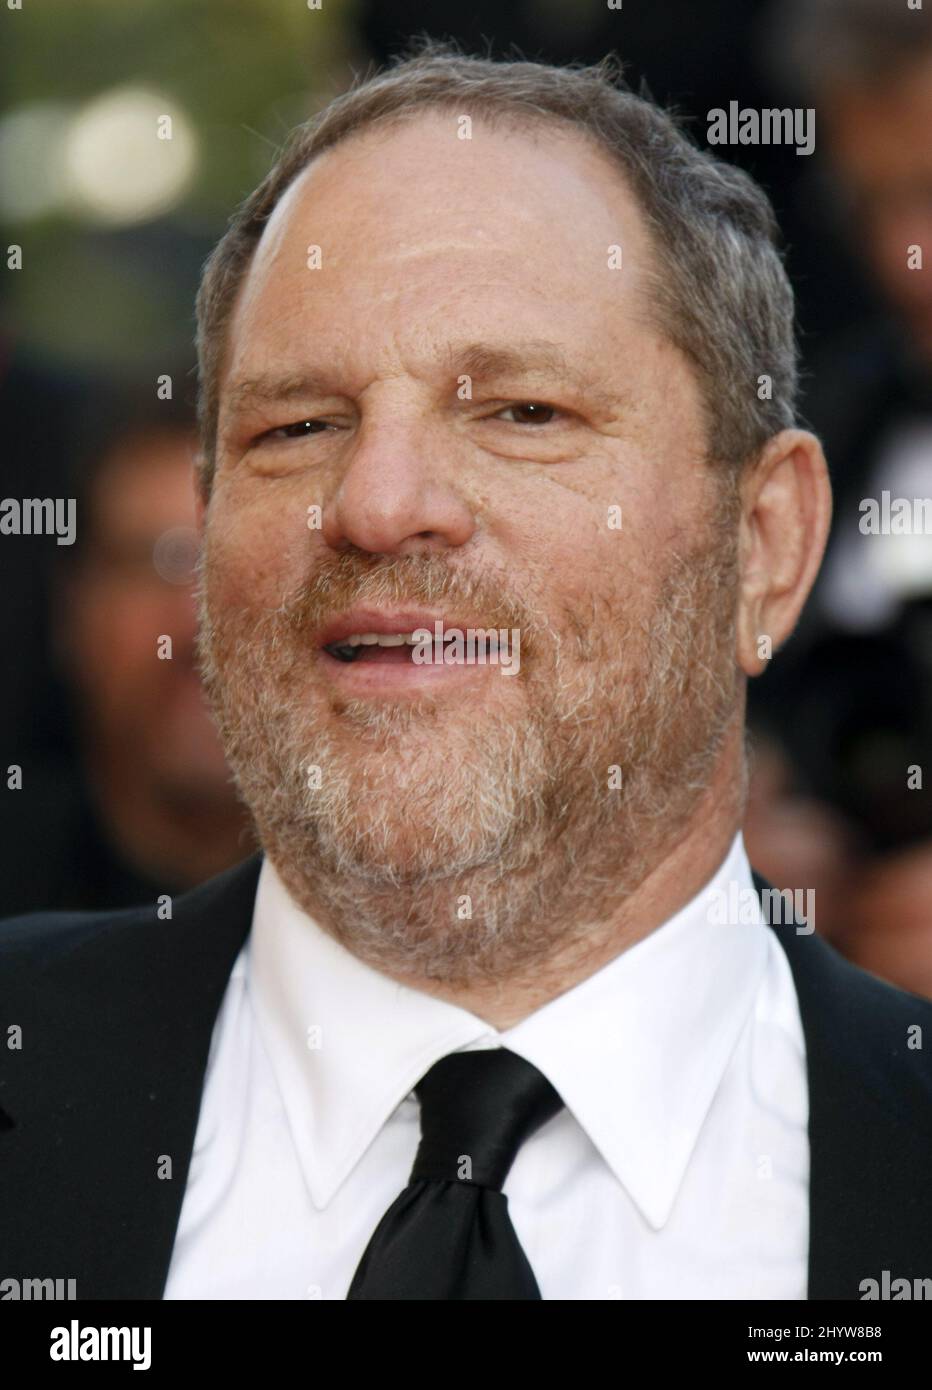 Harvey Weinstein arrives for the premiere of new film Coco Chanel and Igor Stravinsky, during the Cannes Film Festival, at the Palais de Festival In Cannes, France. Stock Photo